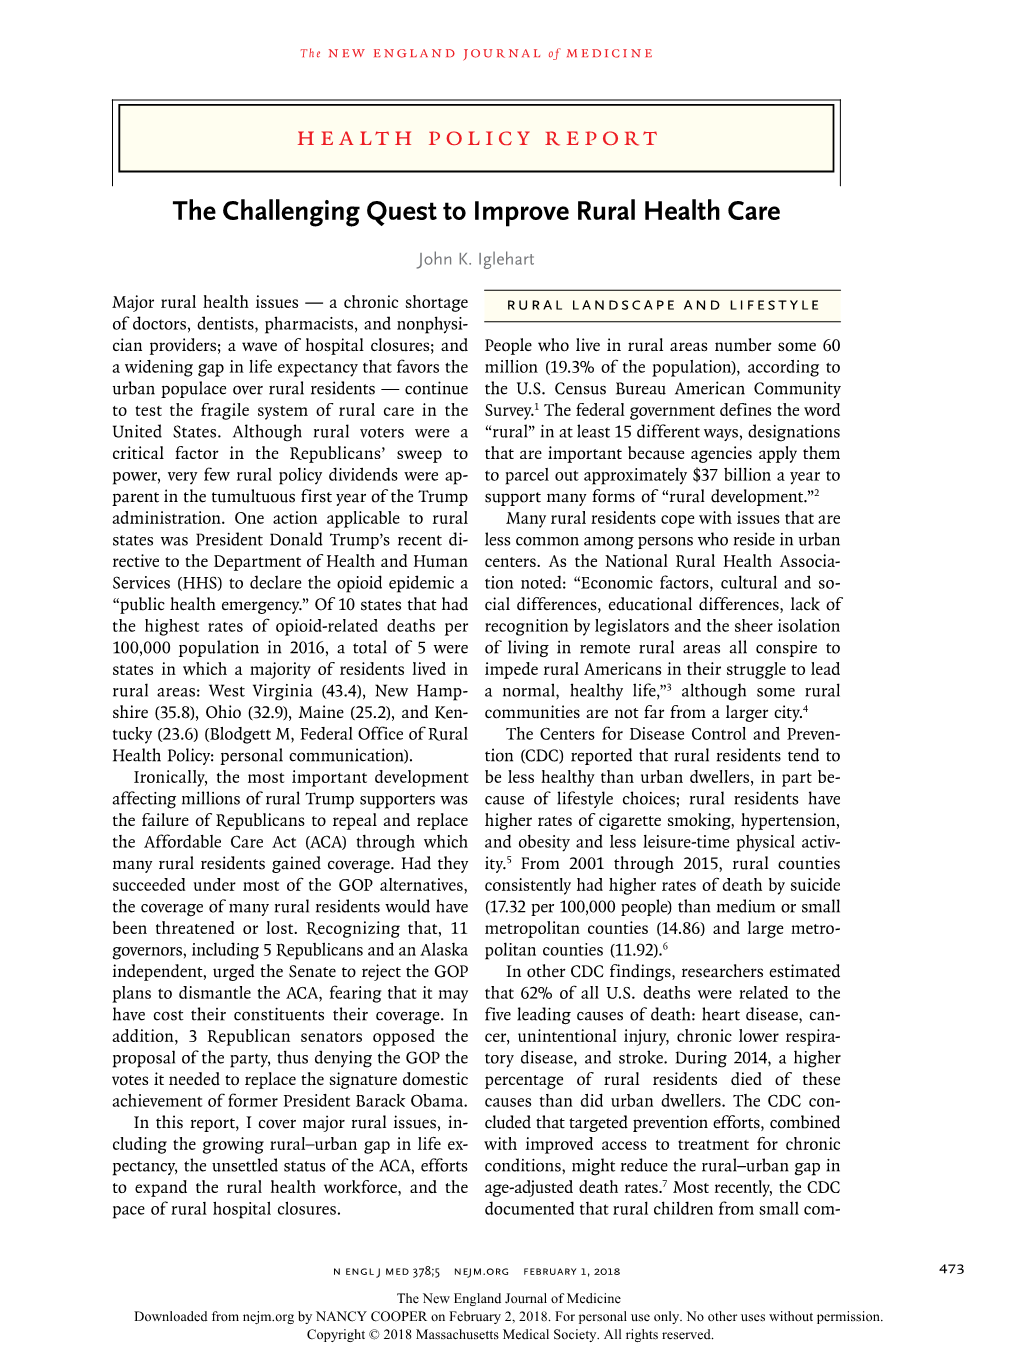 The Challenging Quest to Improve Rural Health Care